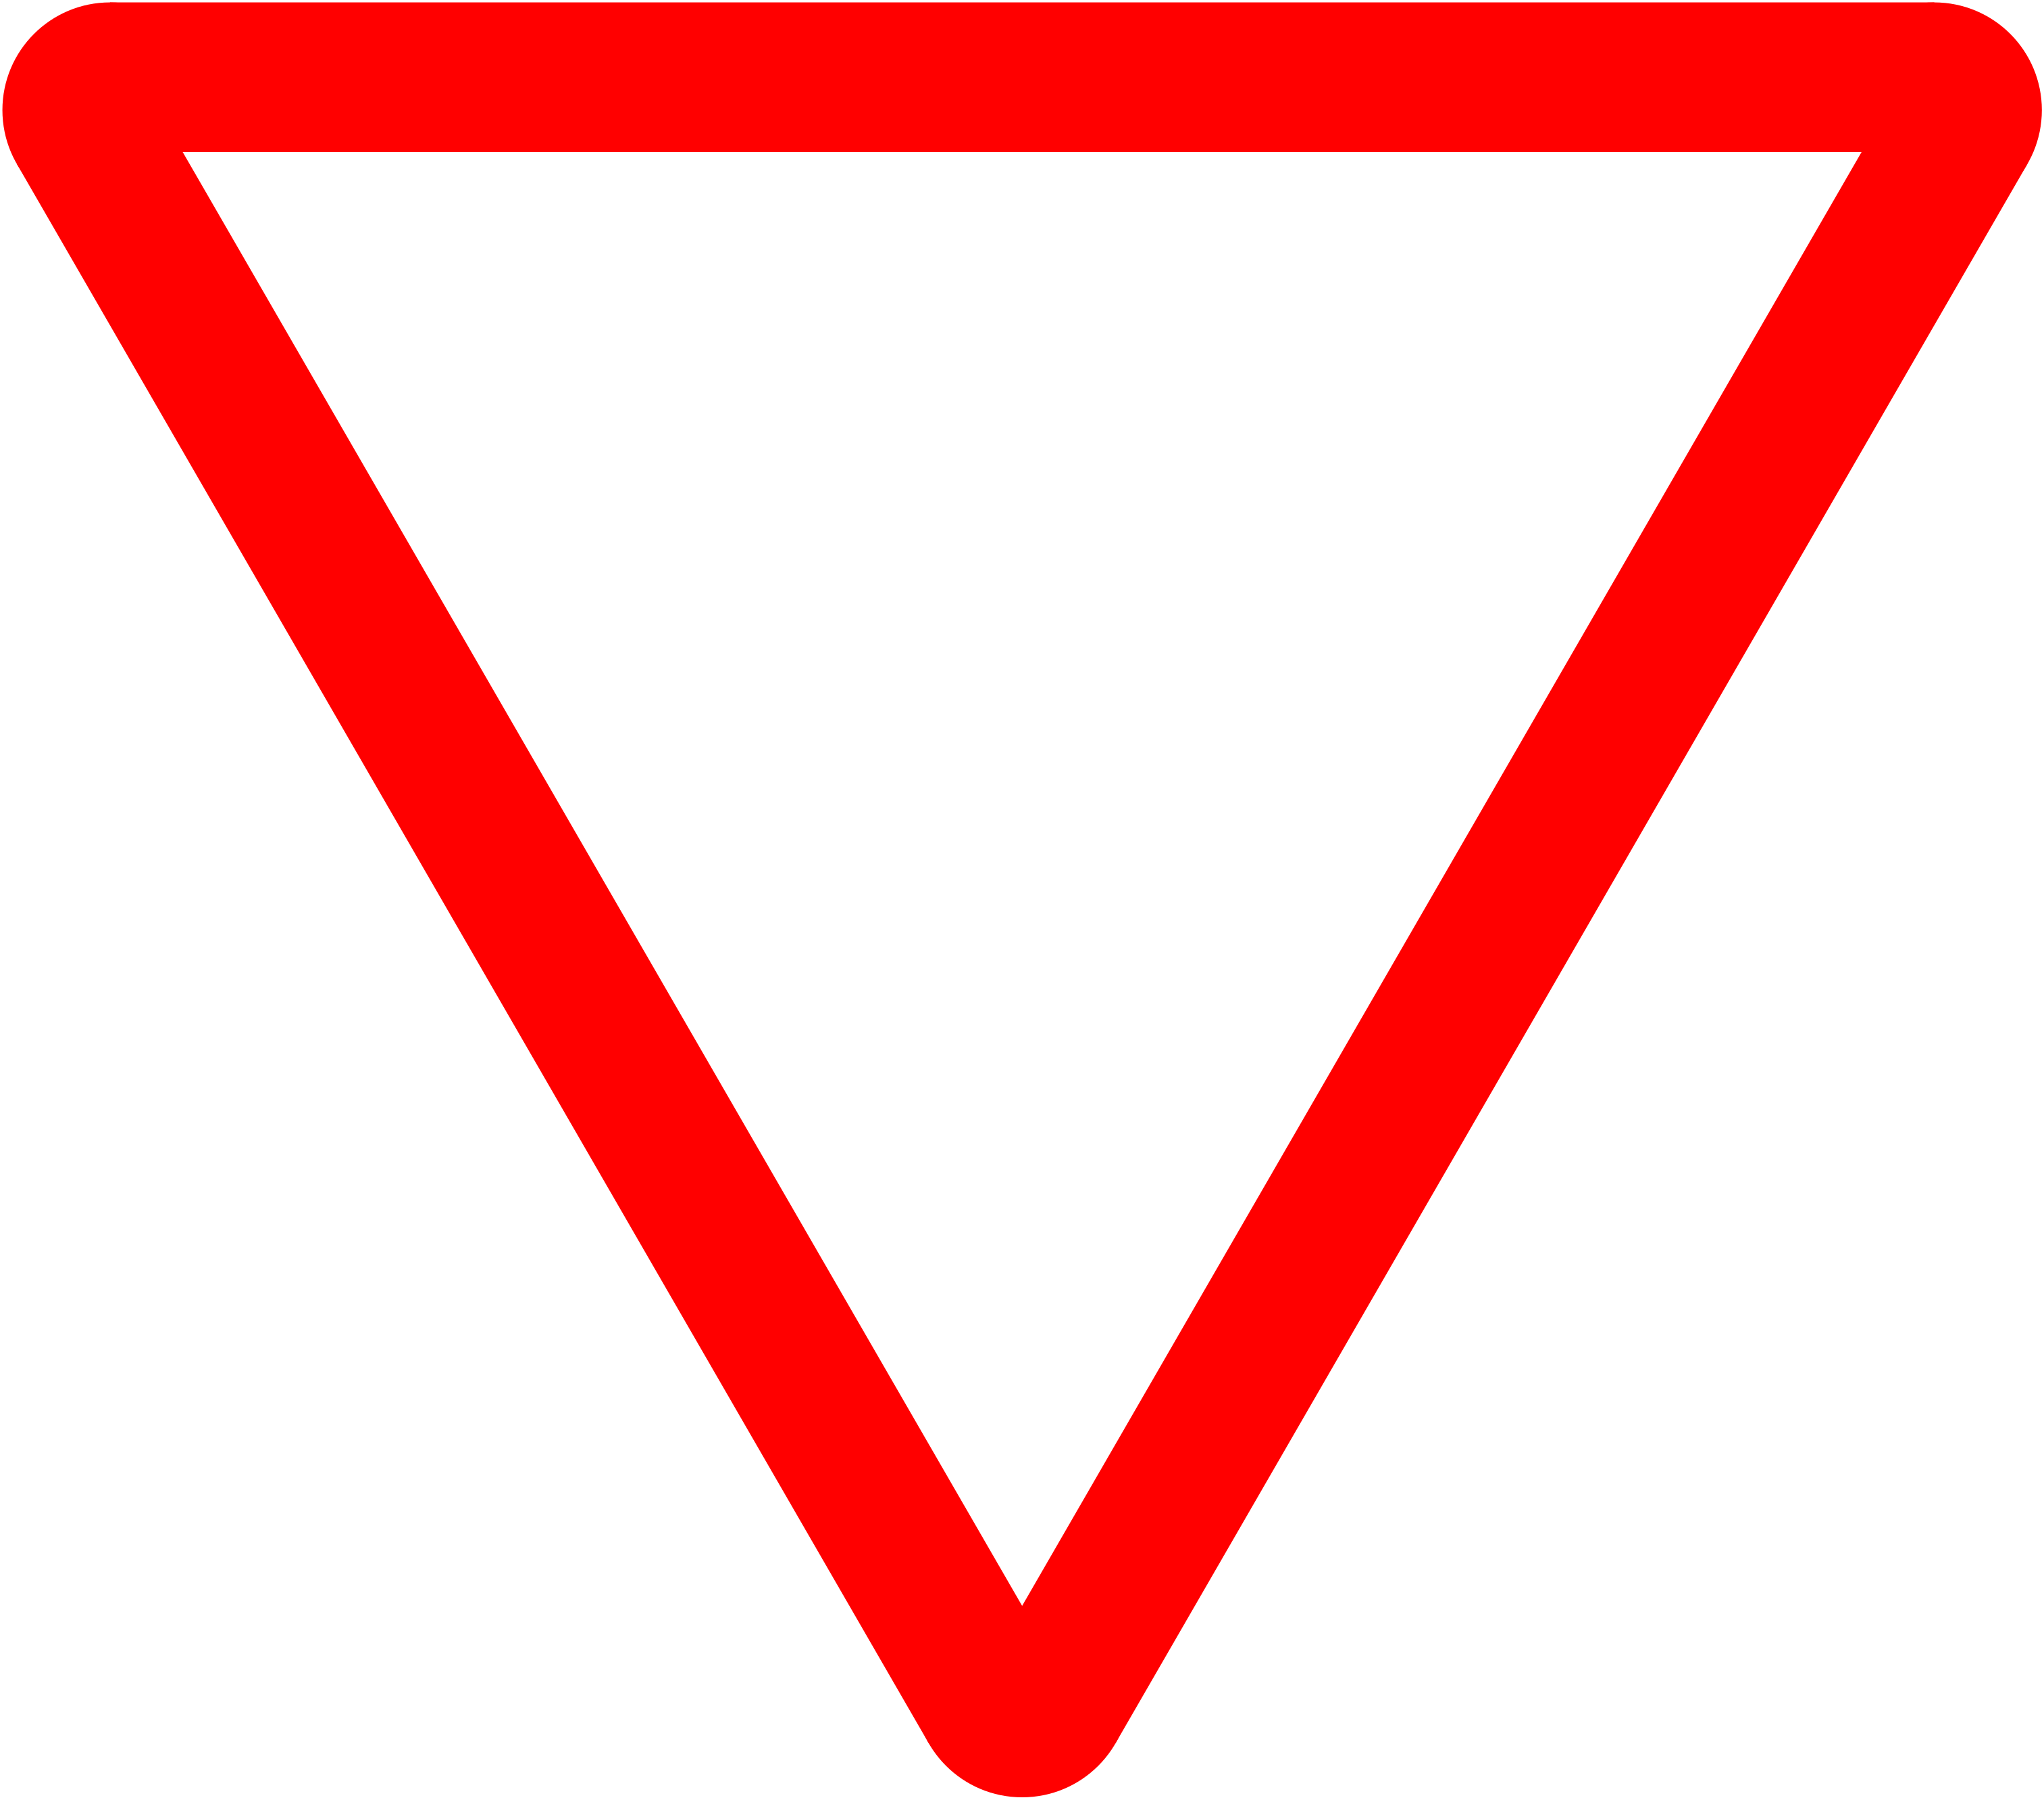 File:IE road sign W-140A.svg - Wikipedia